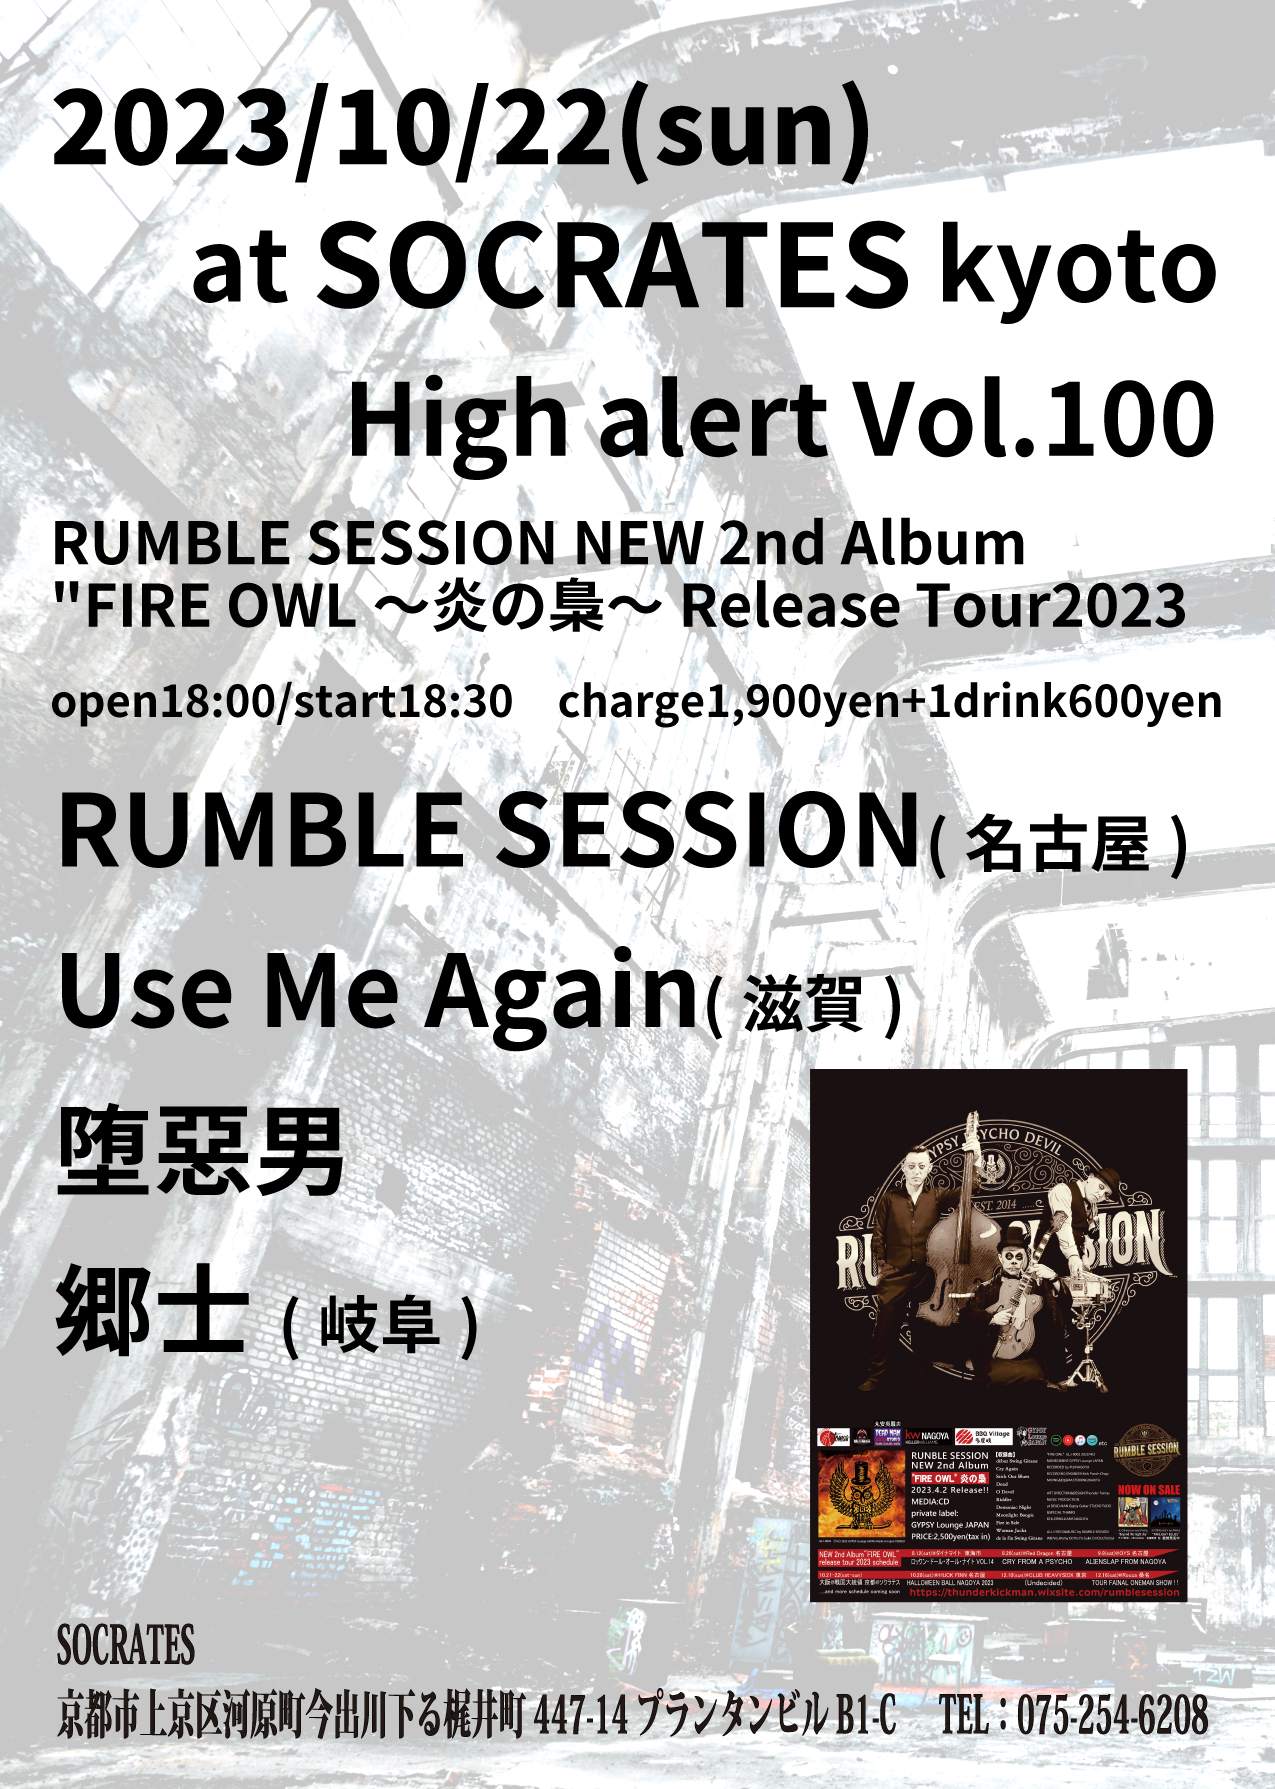 High alert Vol.100 RUMBLE SESSION　NEW 2nd Album 'FIRE OWL～炎の梟～Release Tour2023 - フライヤー表